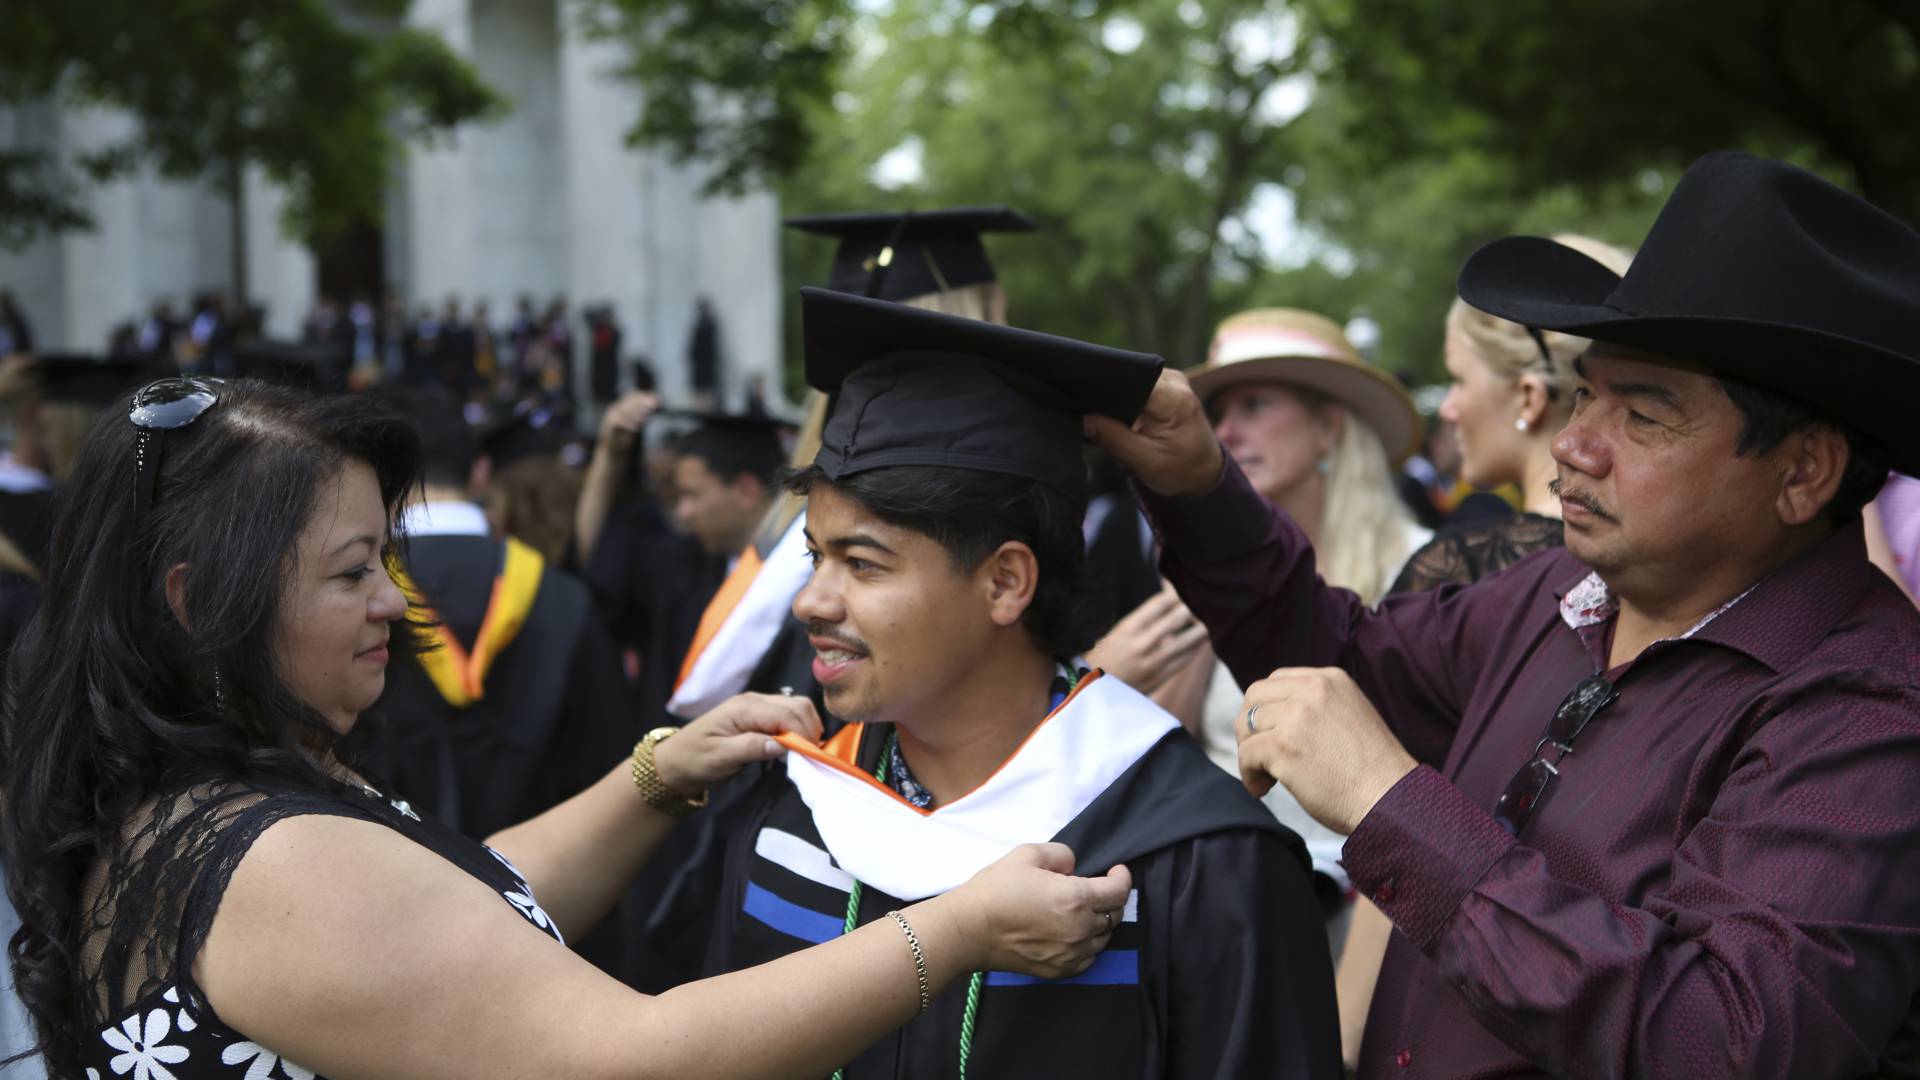 Fidelina Martinez (left) and Juan Leiva (right), natives of El Salvador who live in Trenton, New Jersey, help their son Gerson Leiva (center), the first in his family to go to college, get ready before the processional.